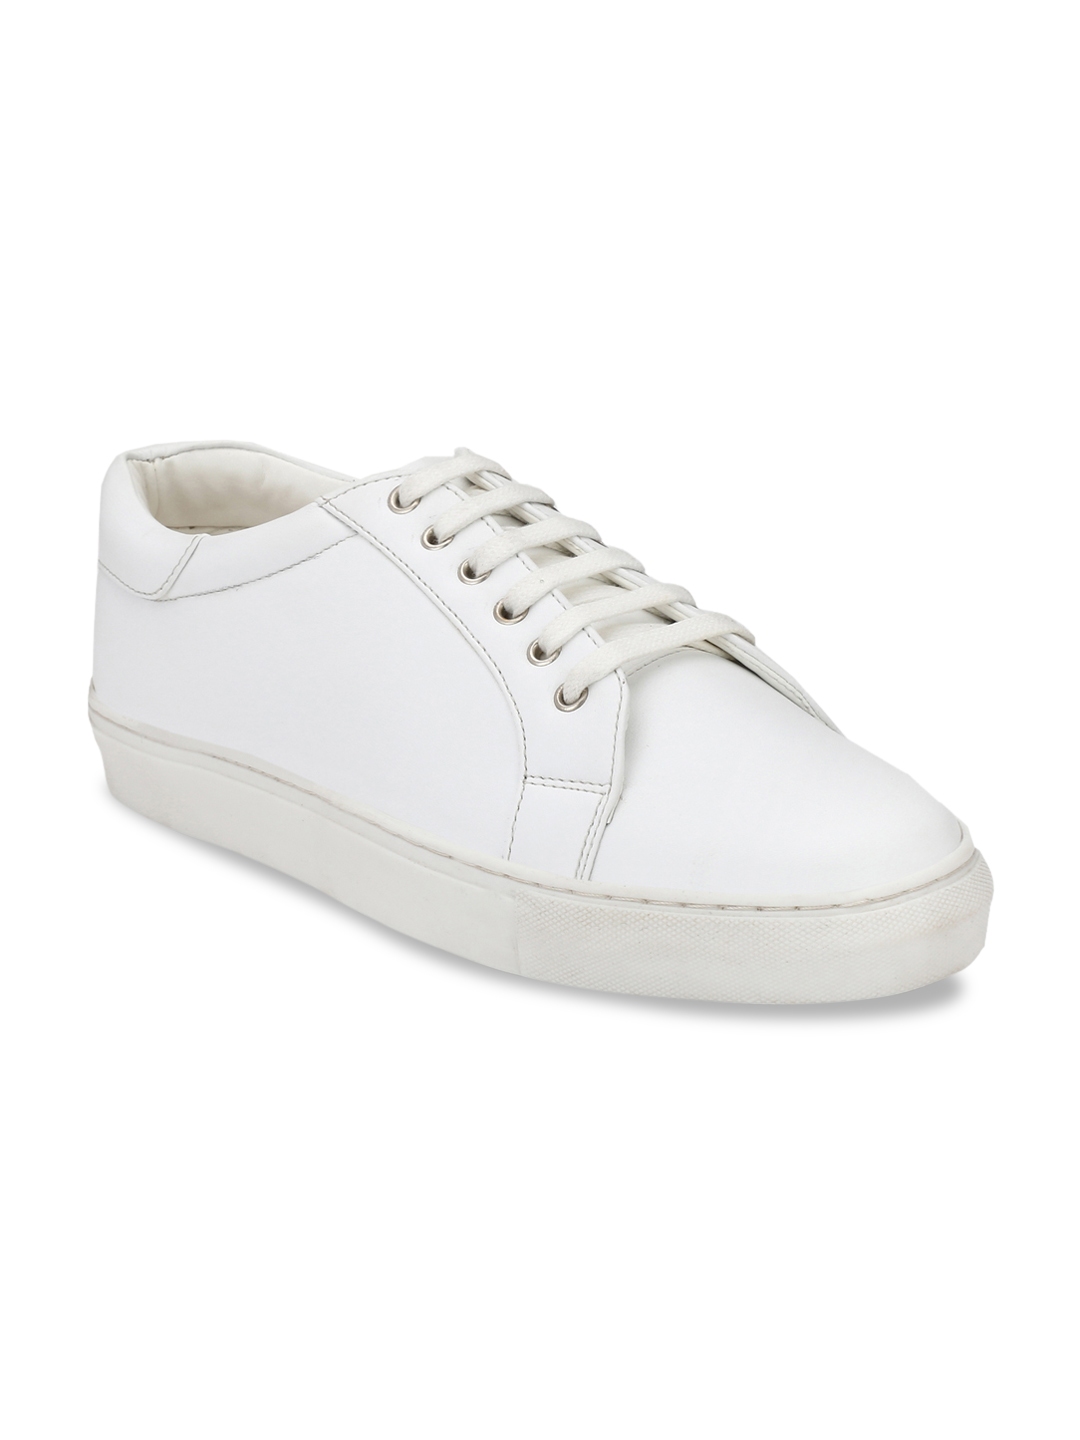 Buy Guava Men White Solid Sneakers - Casual Shoes for Men 11692486 | Myntra